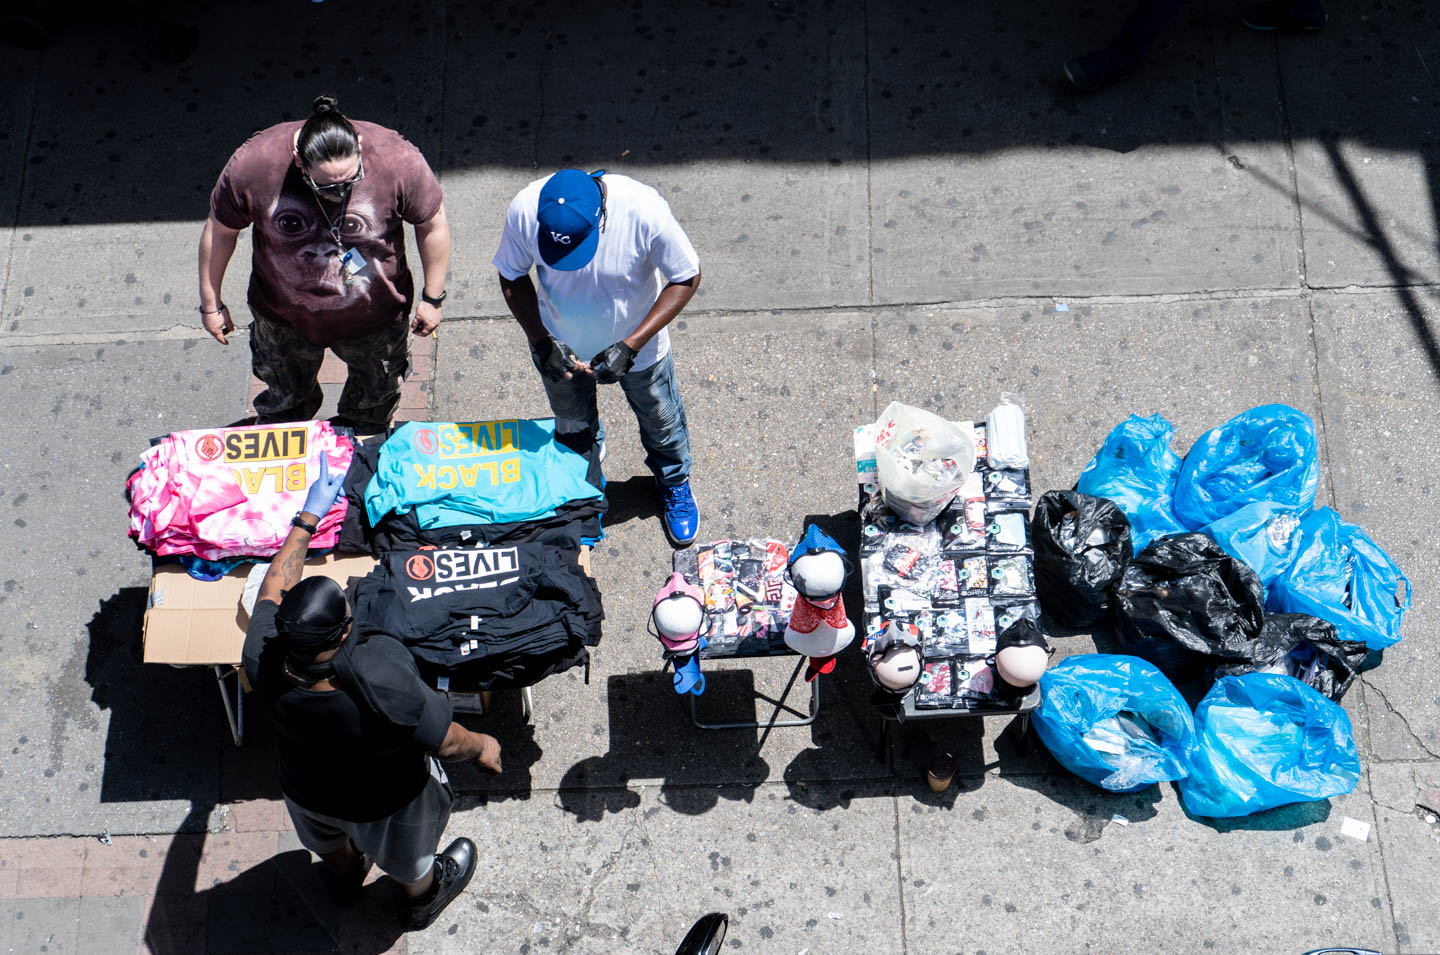 June 17, 2020: Black Lives Matter T-shirts and PPE for sale under the Simpson Street Subway Station. Westchester Avenue south of Southern Boulevard, Bronx, New York. © Camilo José Vergara